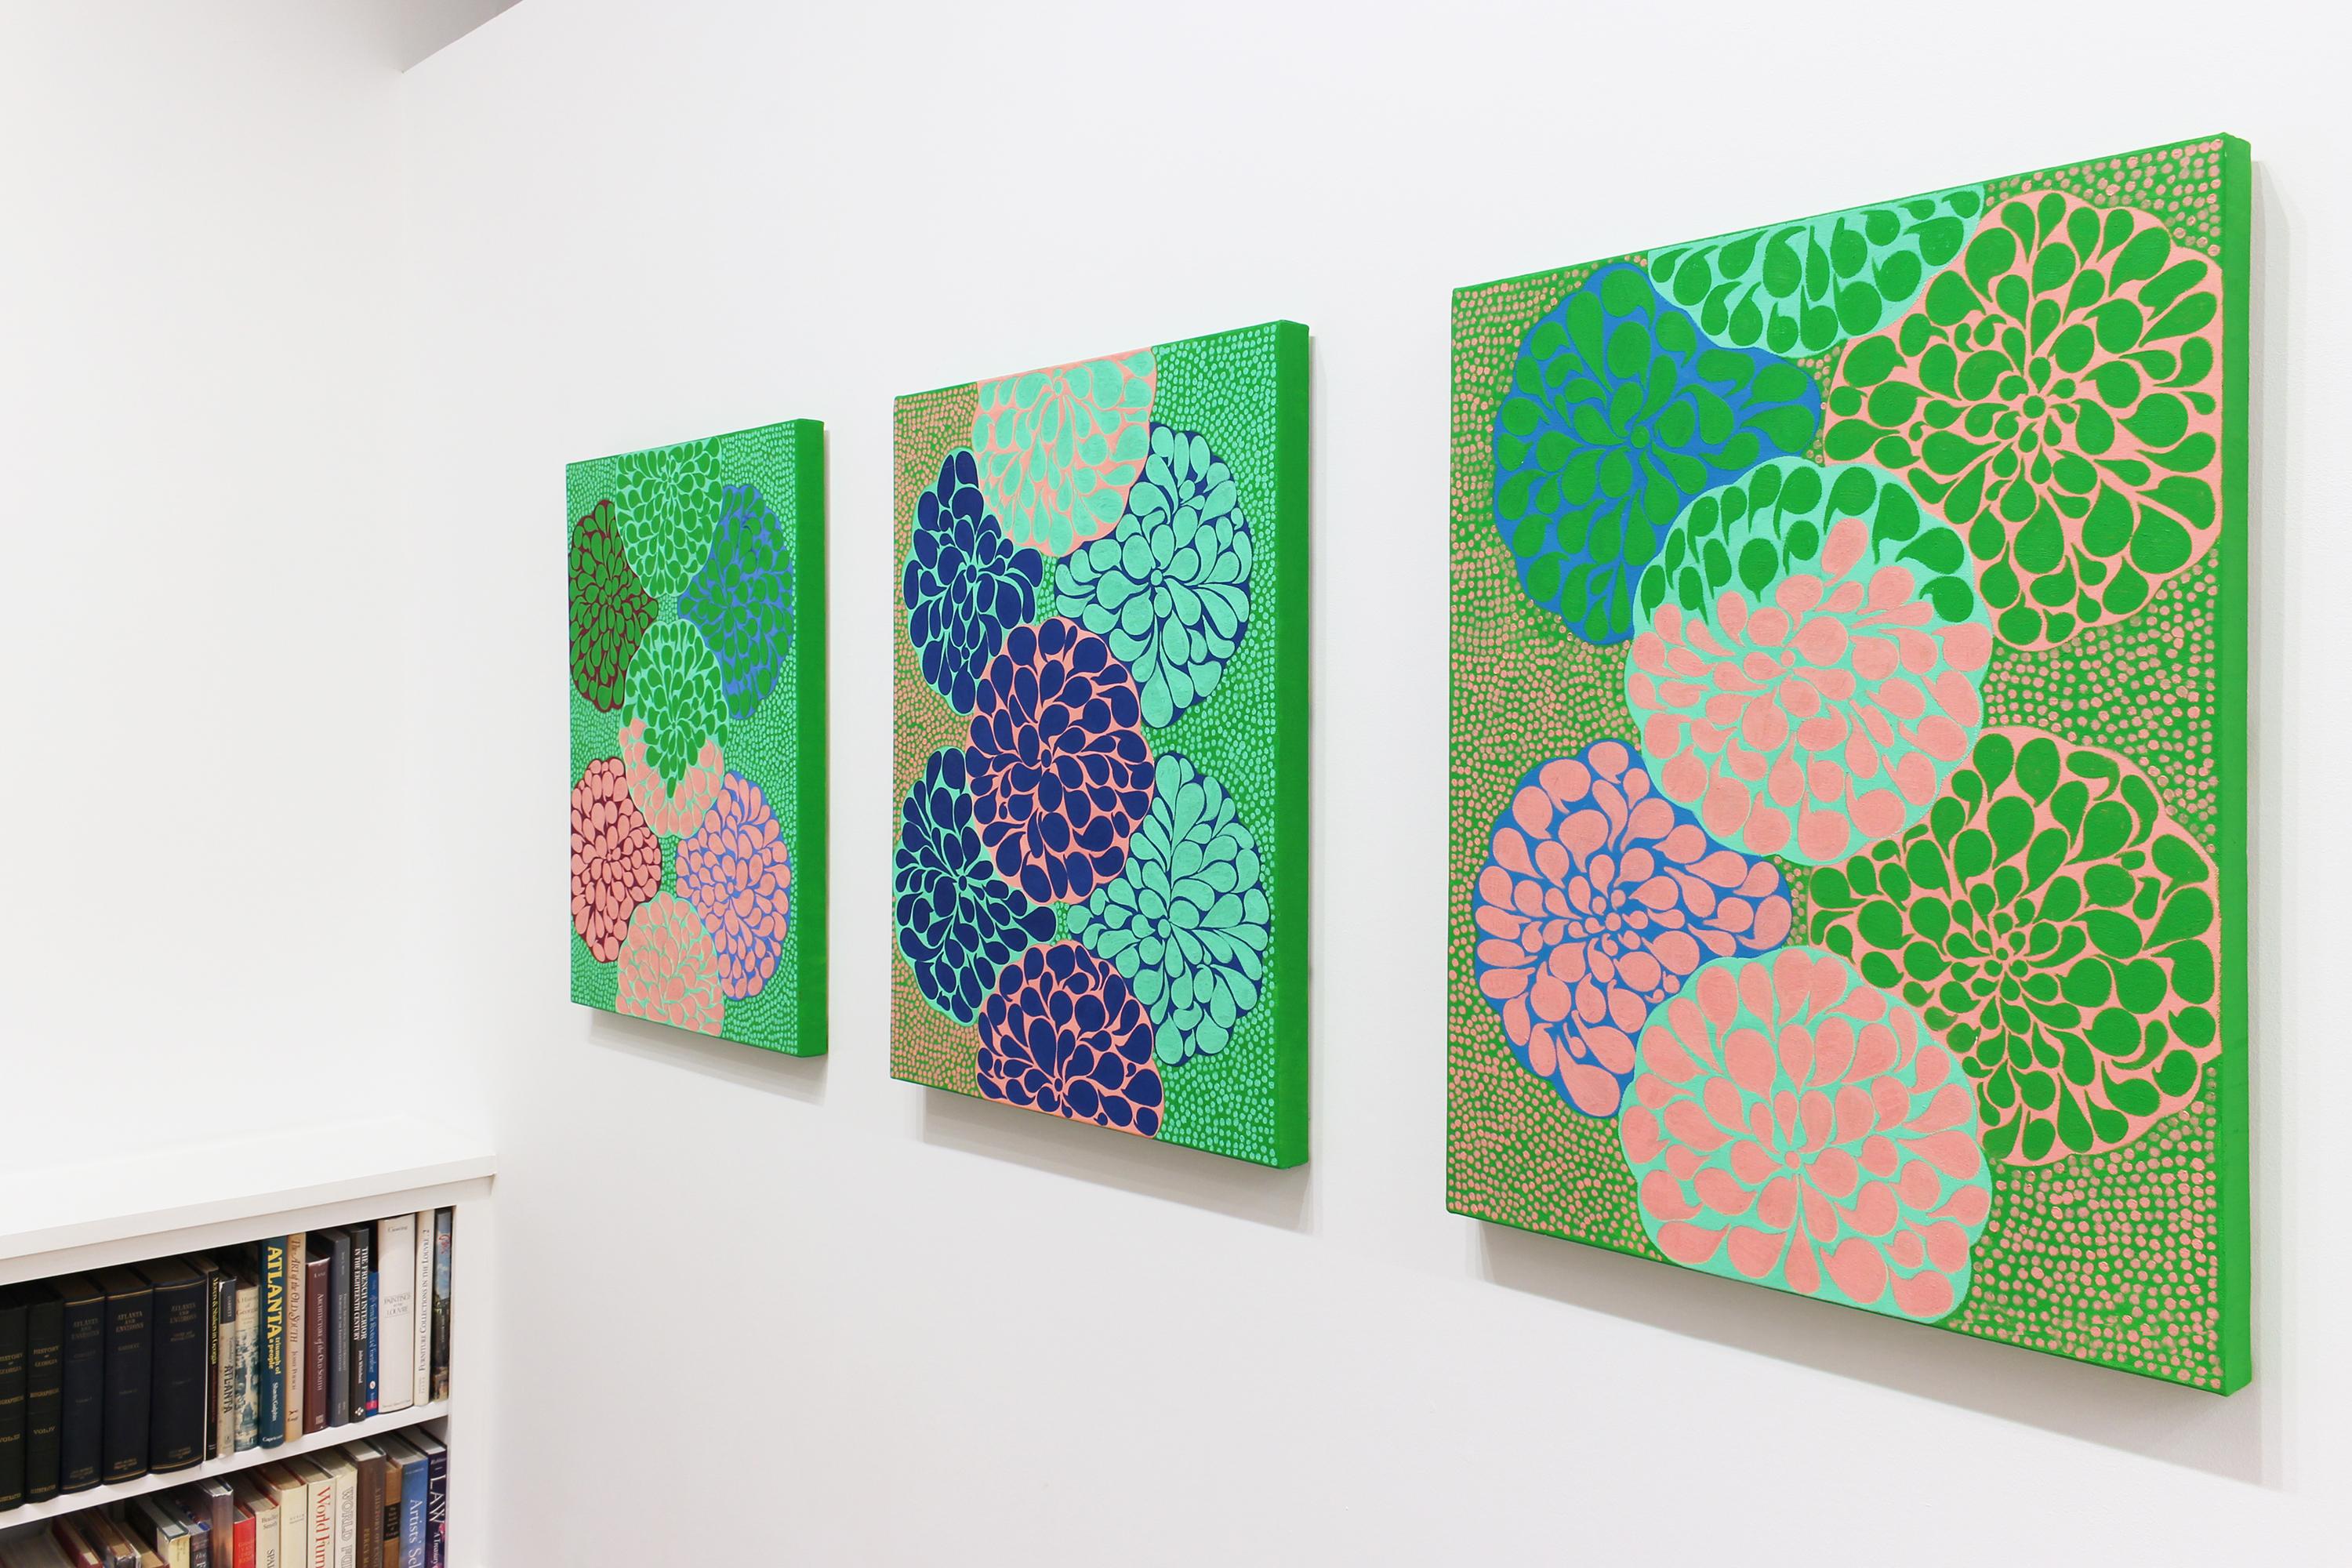 This oil painting featuring hues of pink, green, and blue.

Athens-based artist Carol John’s recent series “Big Bang” features paintings with erratic patterning & brilliant colors layered in order to surprise a viewer’s sensibility.  Carol’s